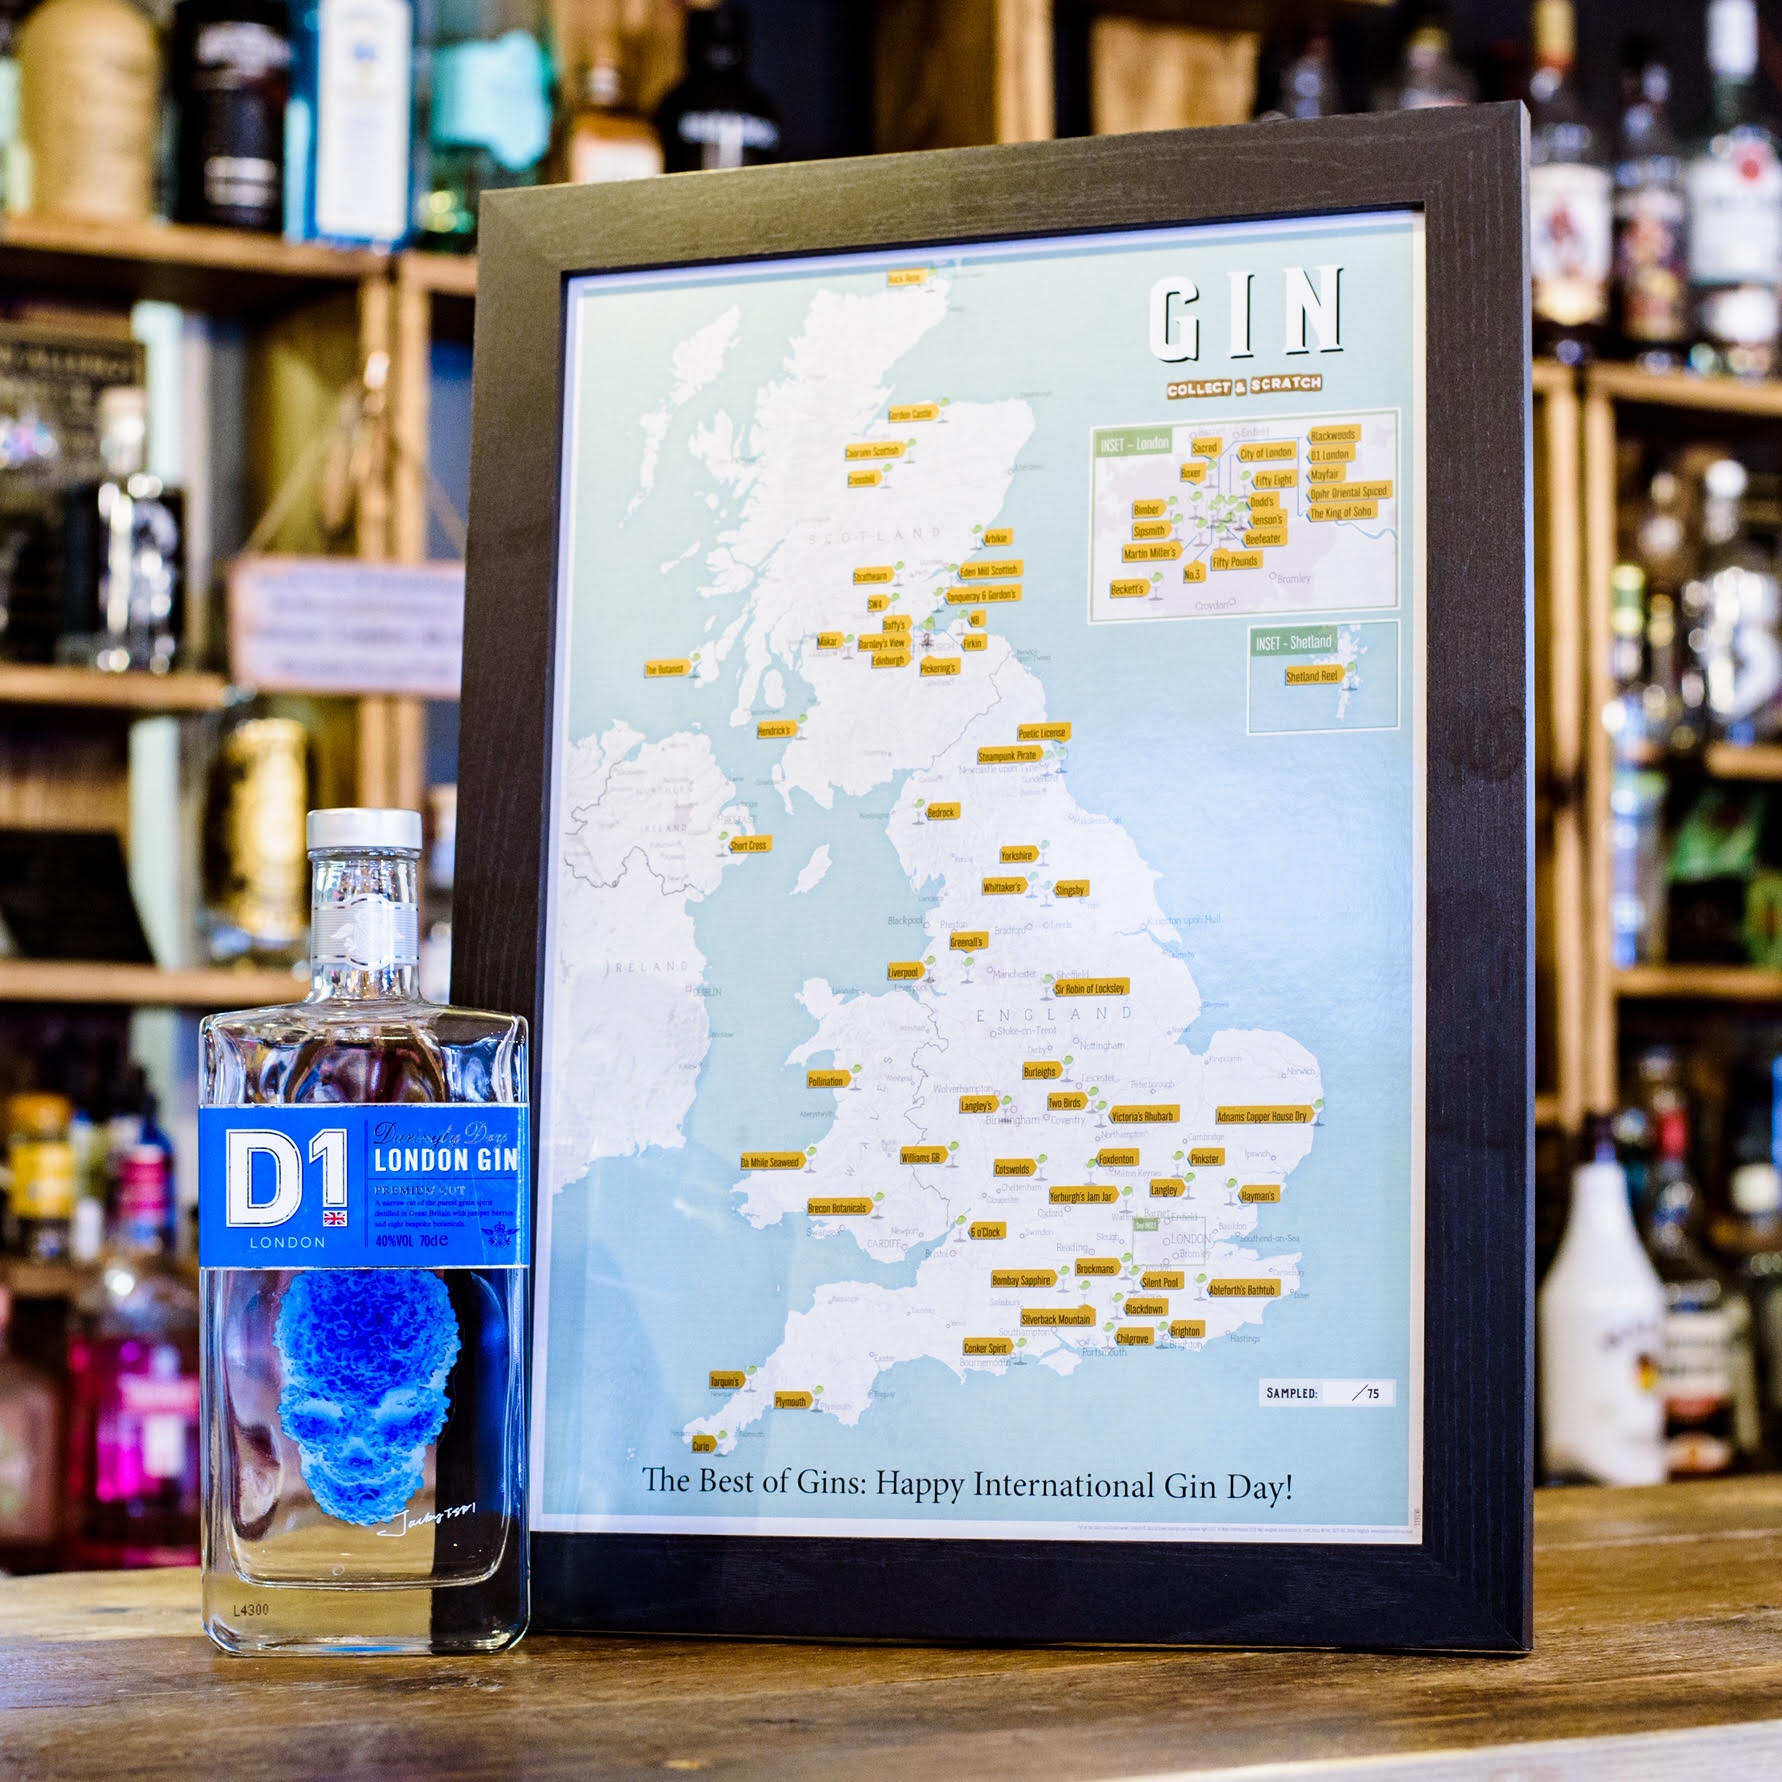 Enter our exciting Giveaway for International Gin Day! Maps